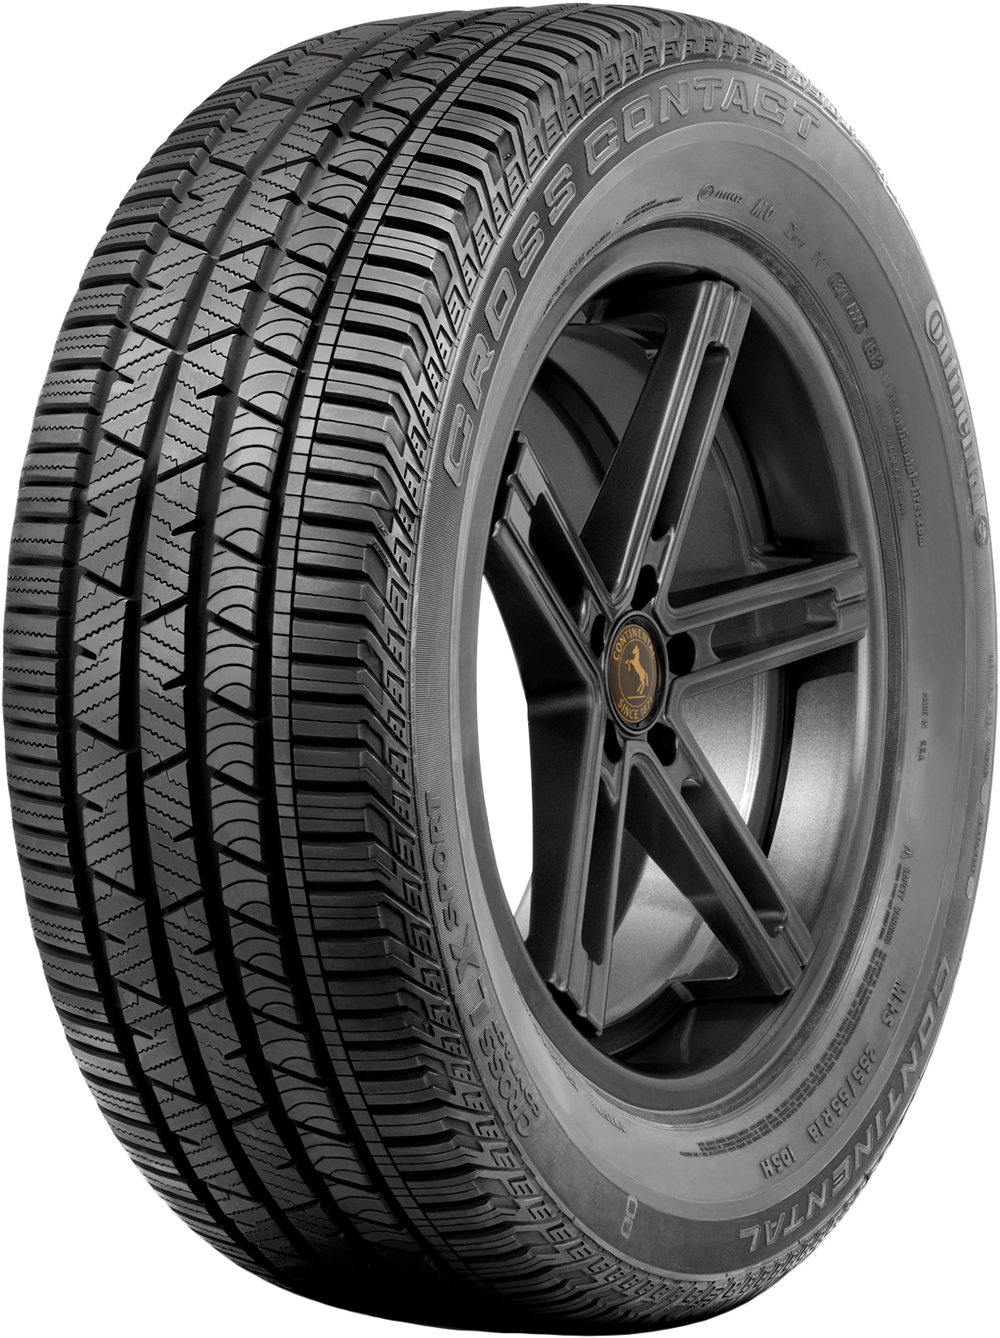 CONTINENTAL CROSSCONTACT LX SP 235/55 R19 101H